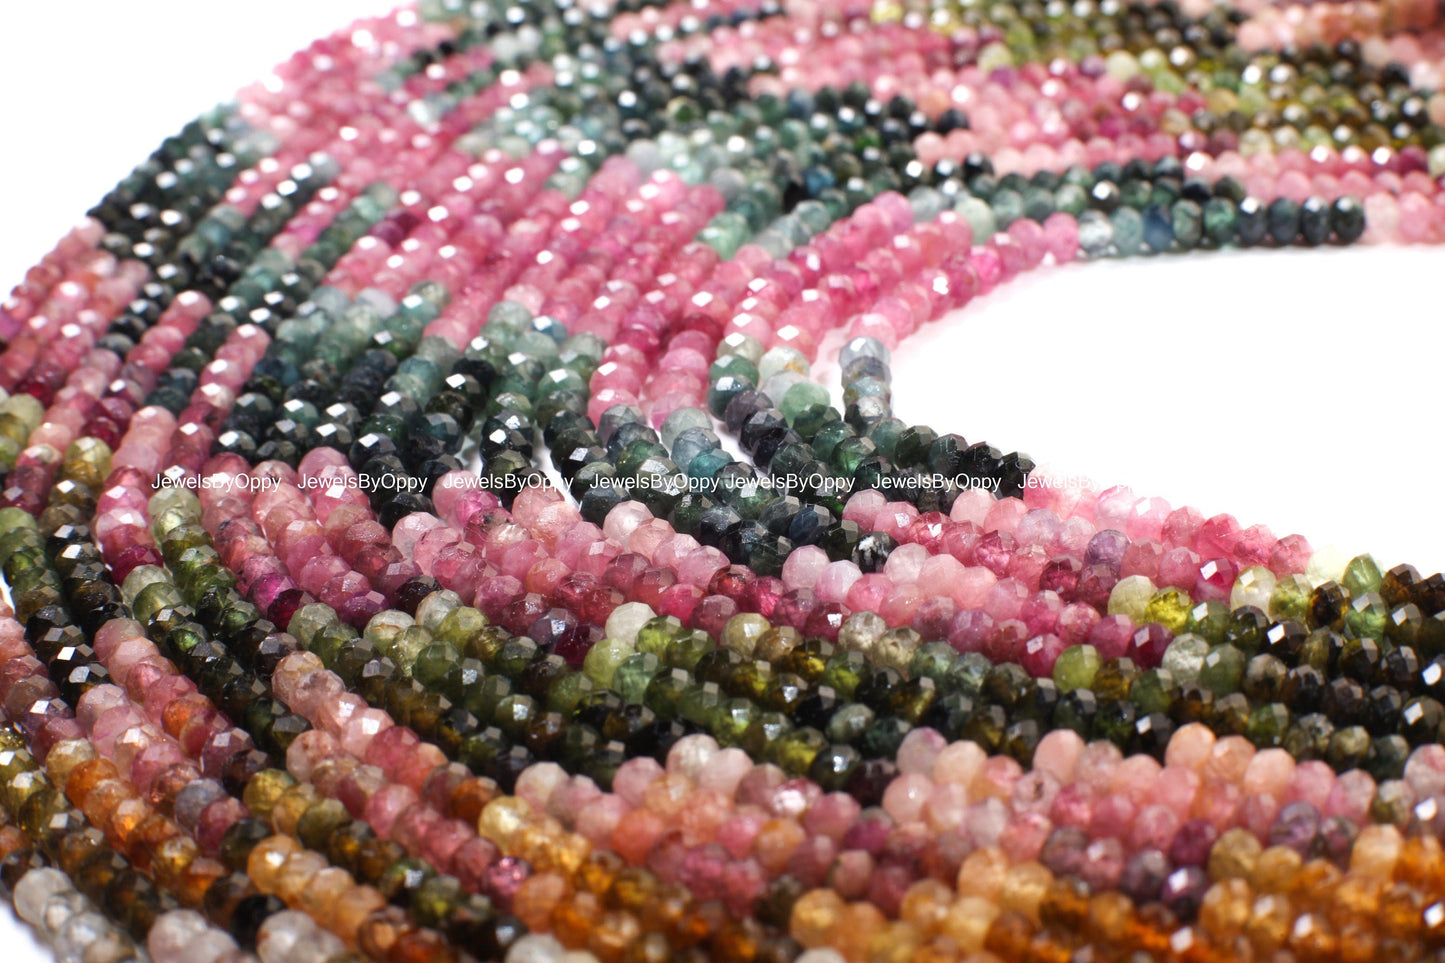 Natural Watermelon Tourmaline 4mm Rondelle, Faceted Micro Diamond Cut Tourmaline Rondelle, Jewelry Making, Necklace Beads 12.75&quot; Strand